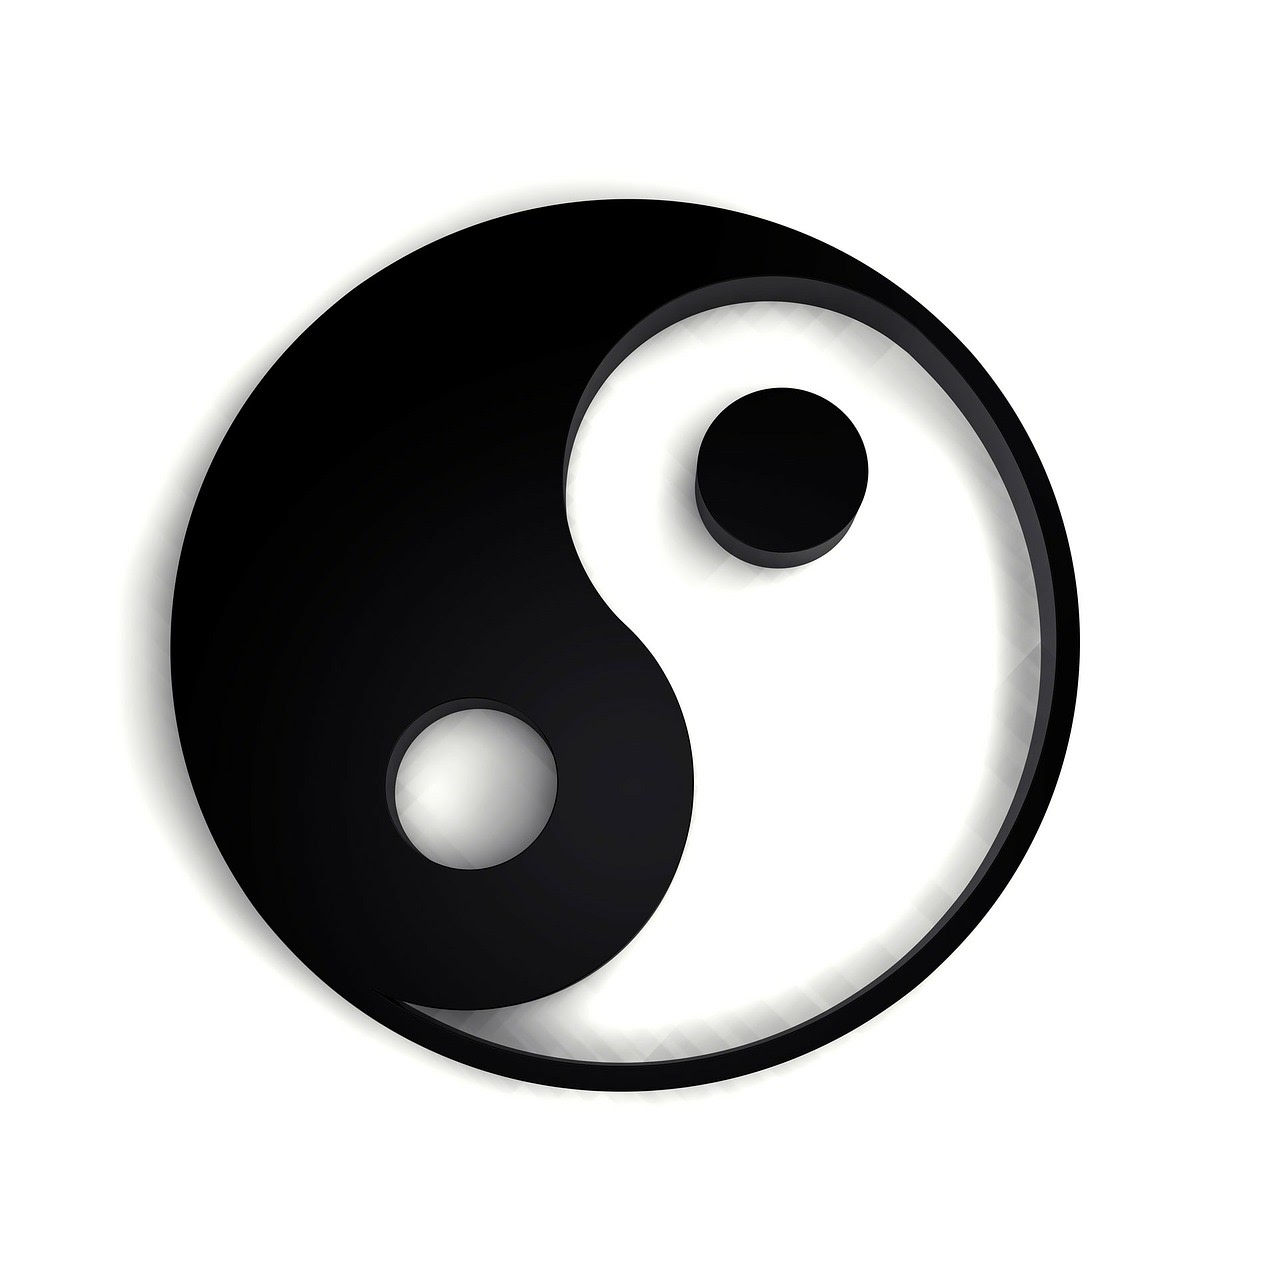 This is an image of the yin-yang symbol.